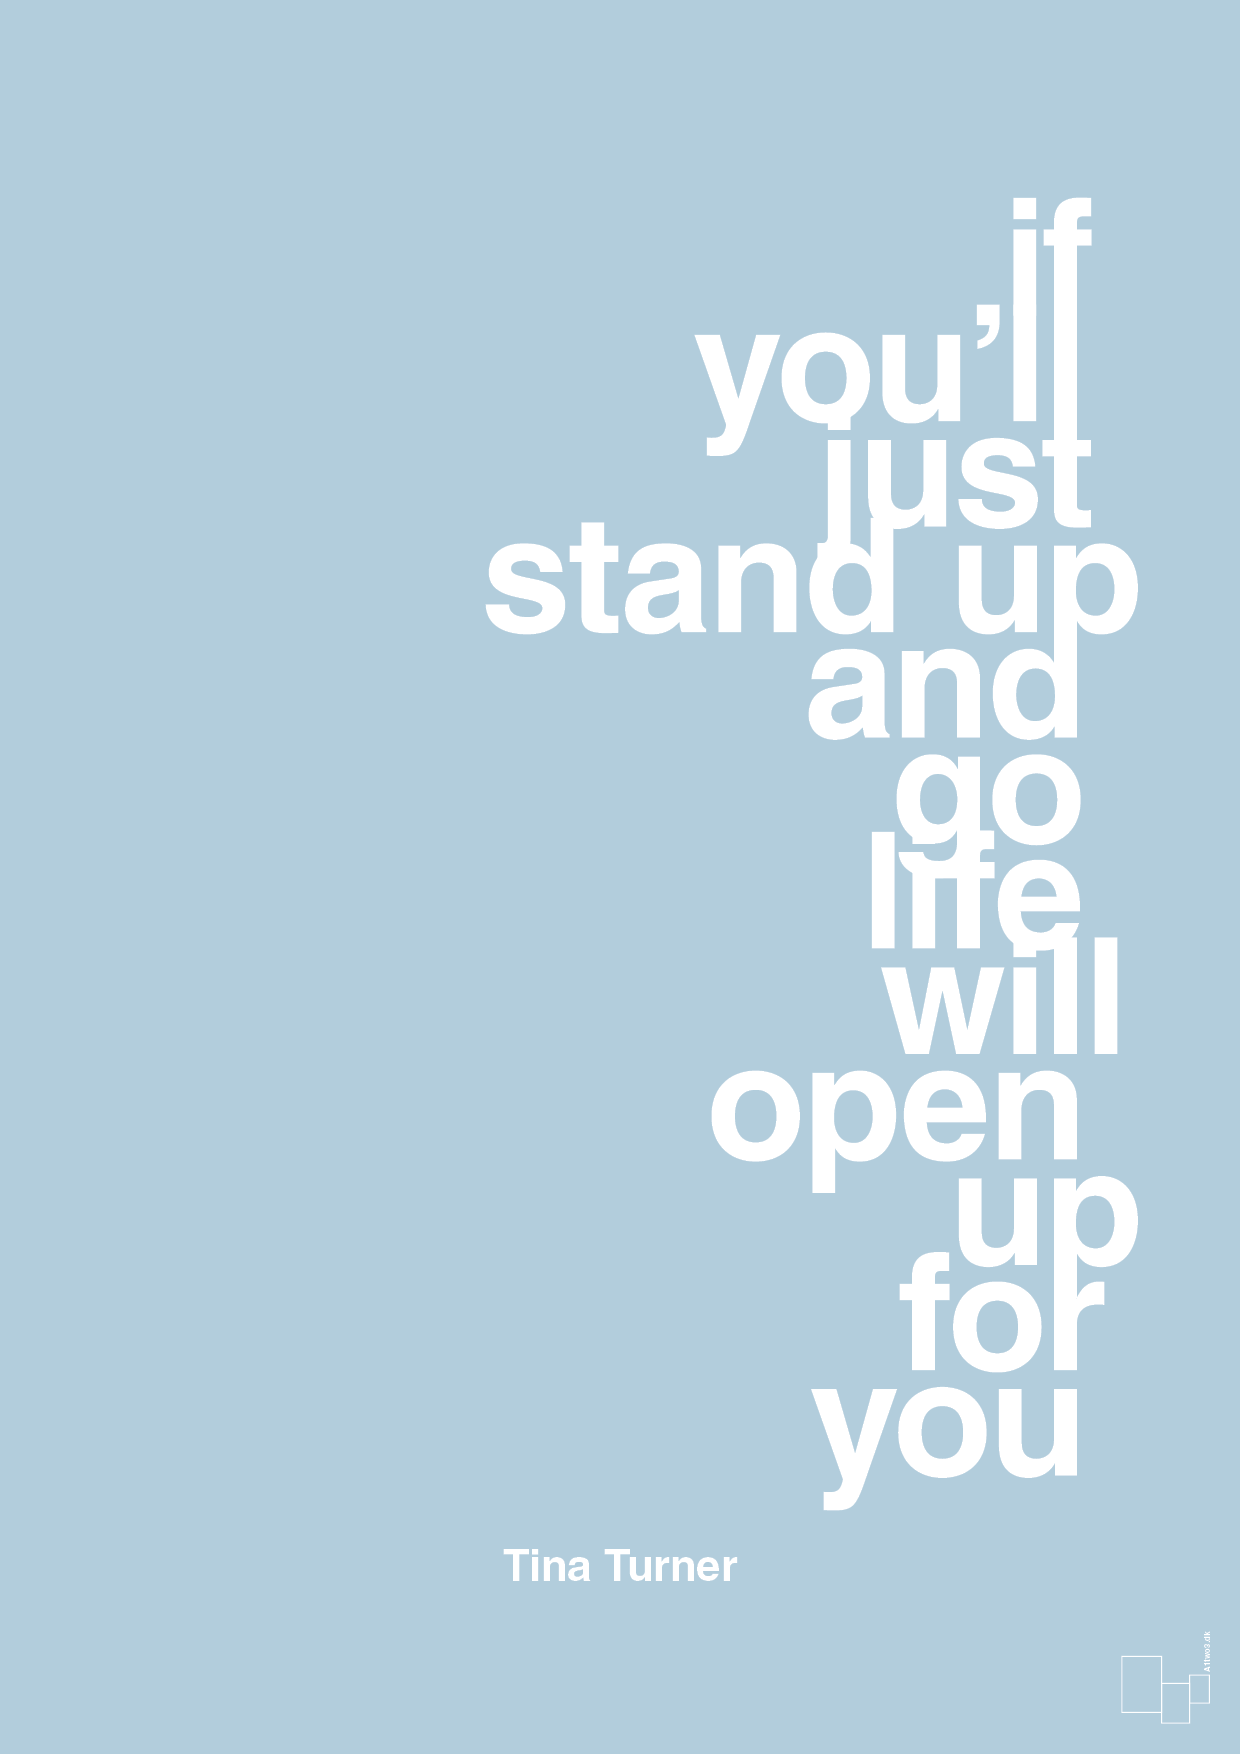 if you’ll just stand up and go life will open up for you - Plakat med Citater i Heavenly Blue